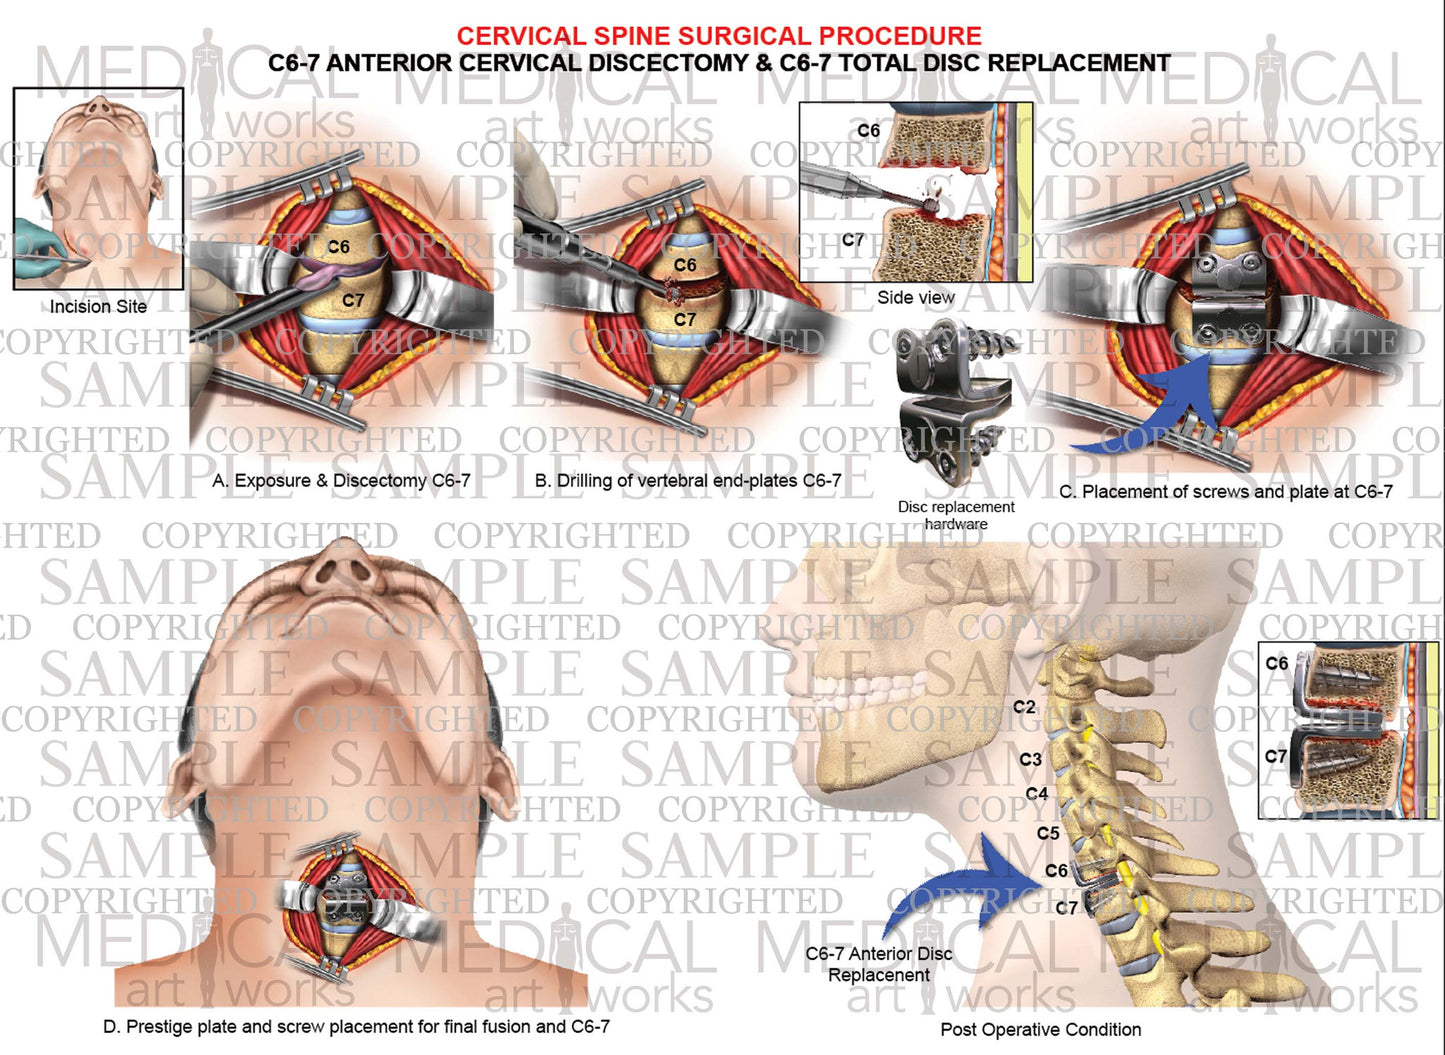 1 Level - C6-C7 anterior cervical discectomy and fusion - cervical artificial disc replacement